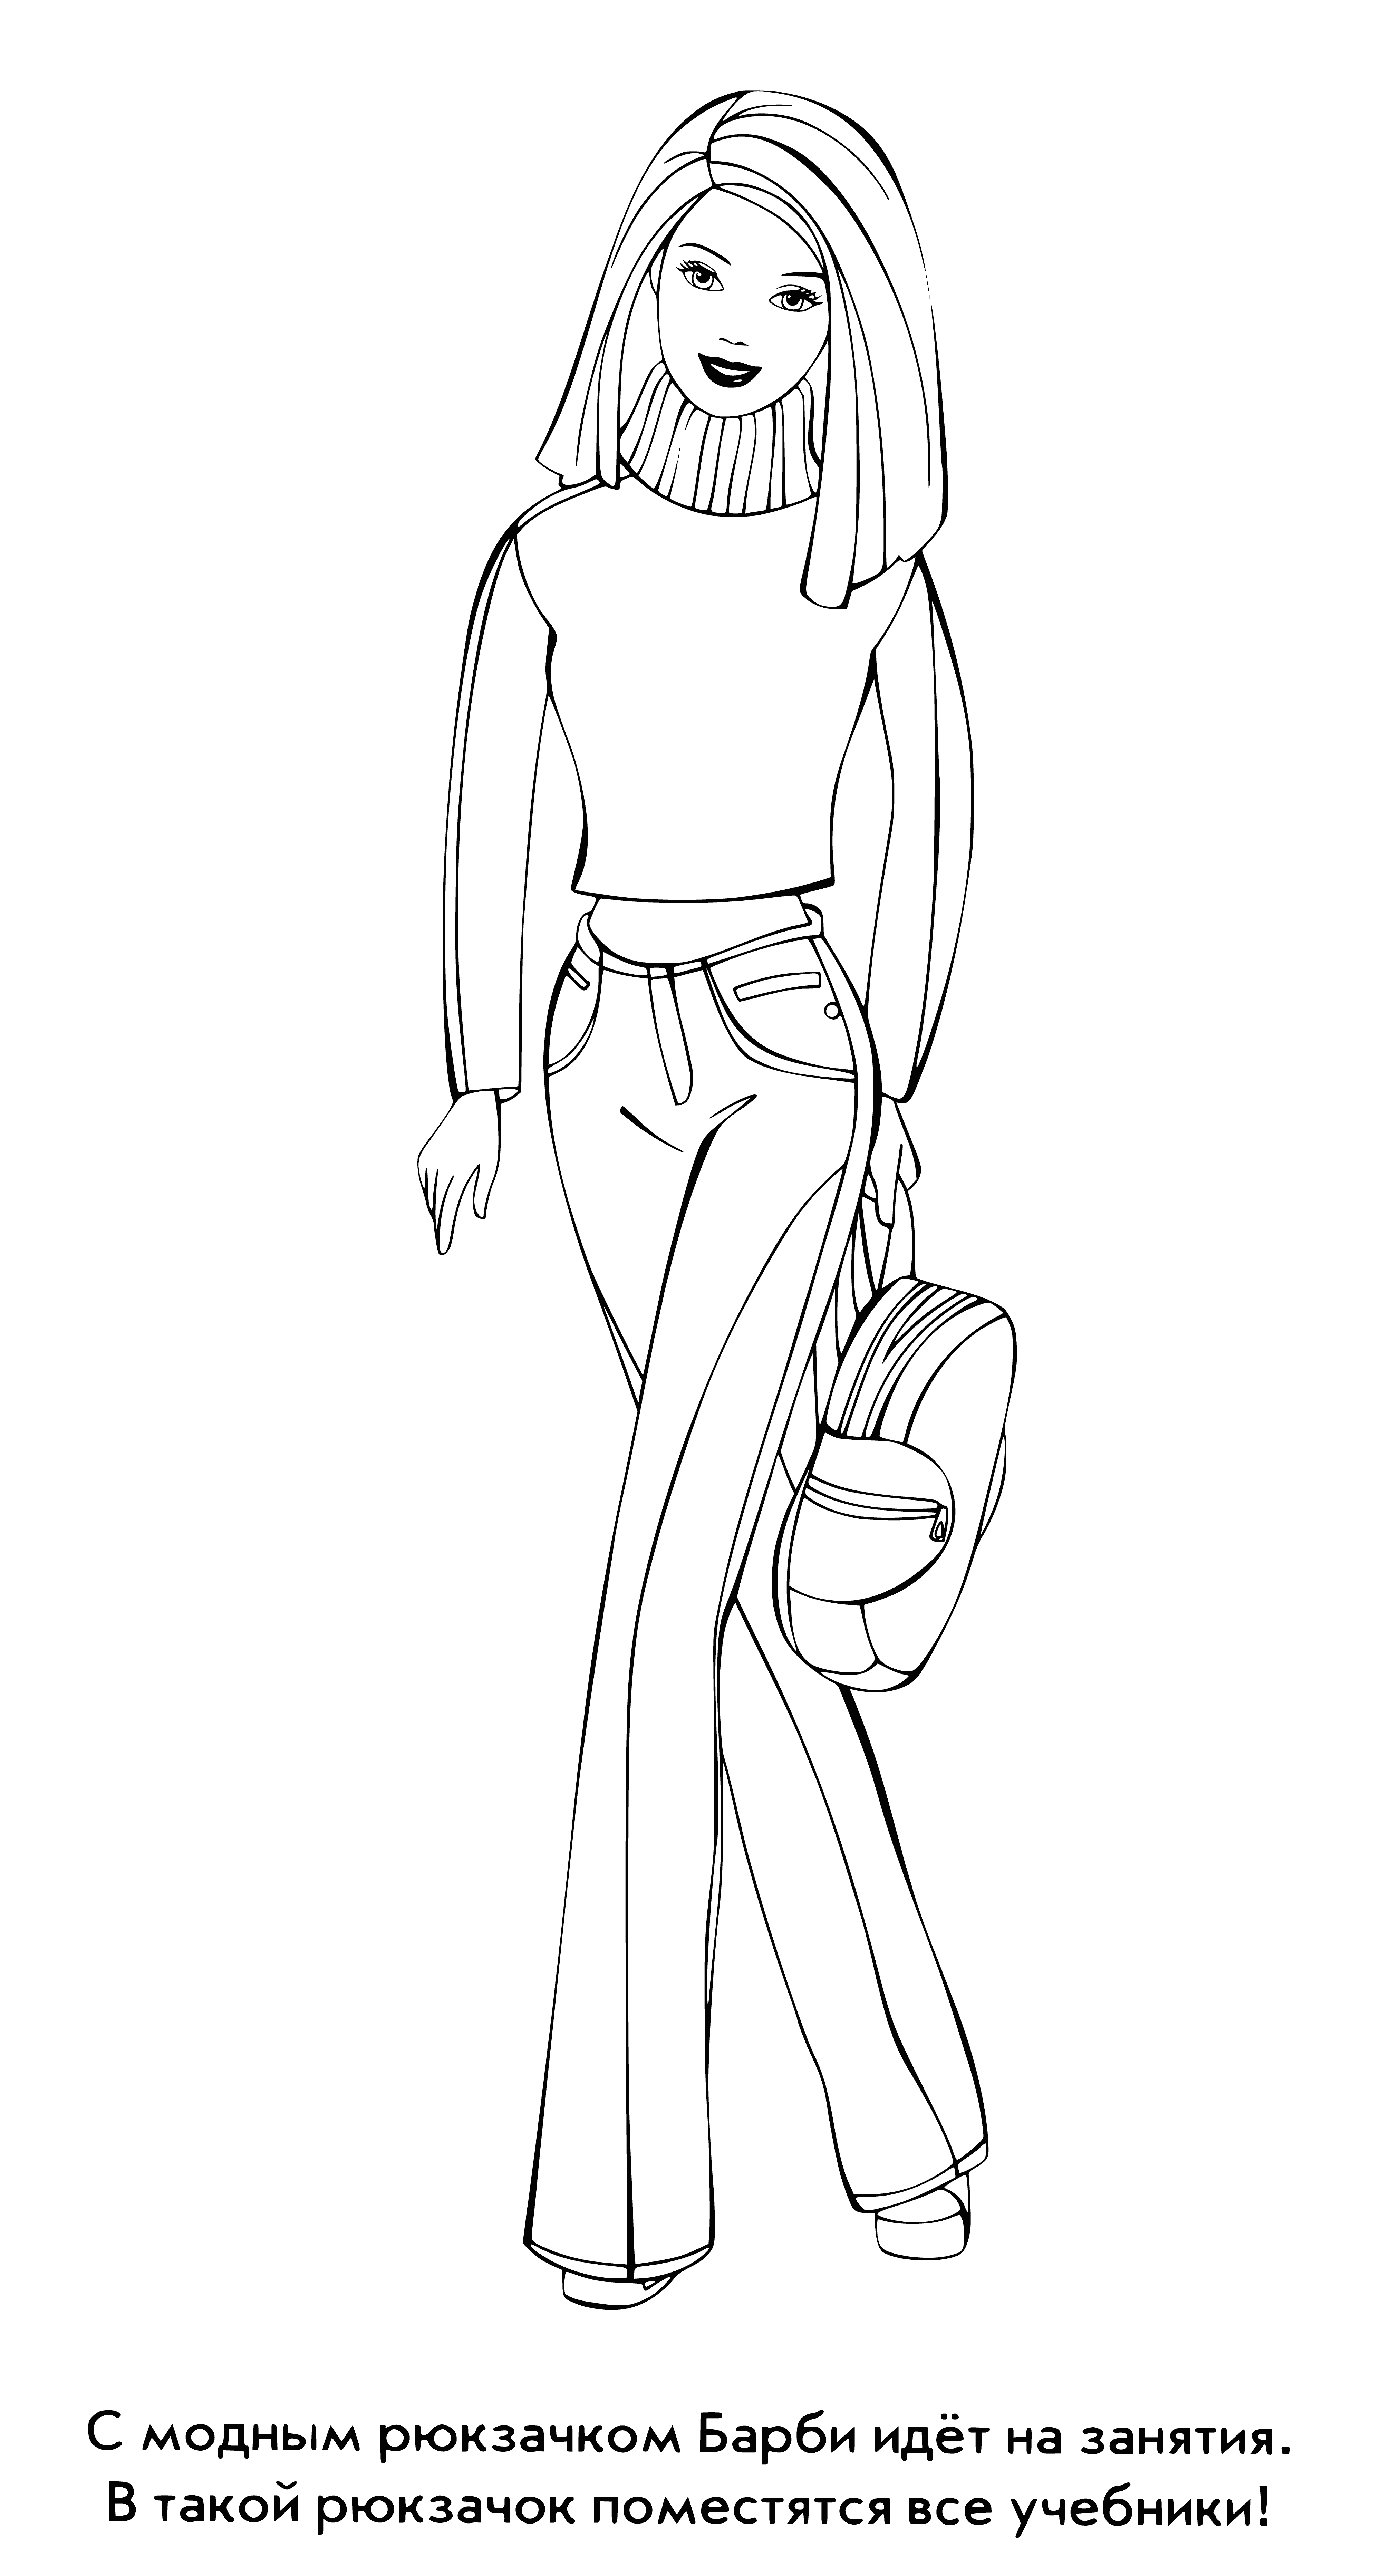 Barbie goes to class coloring page